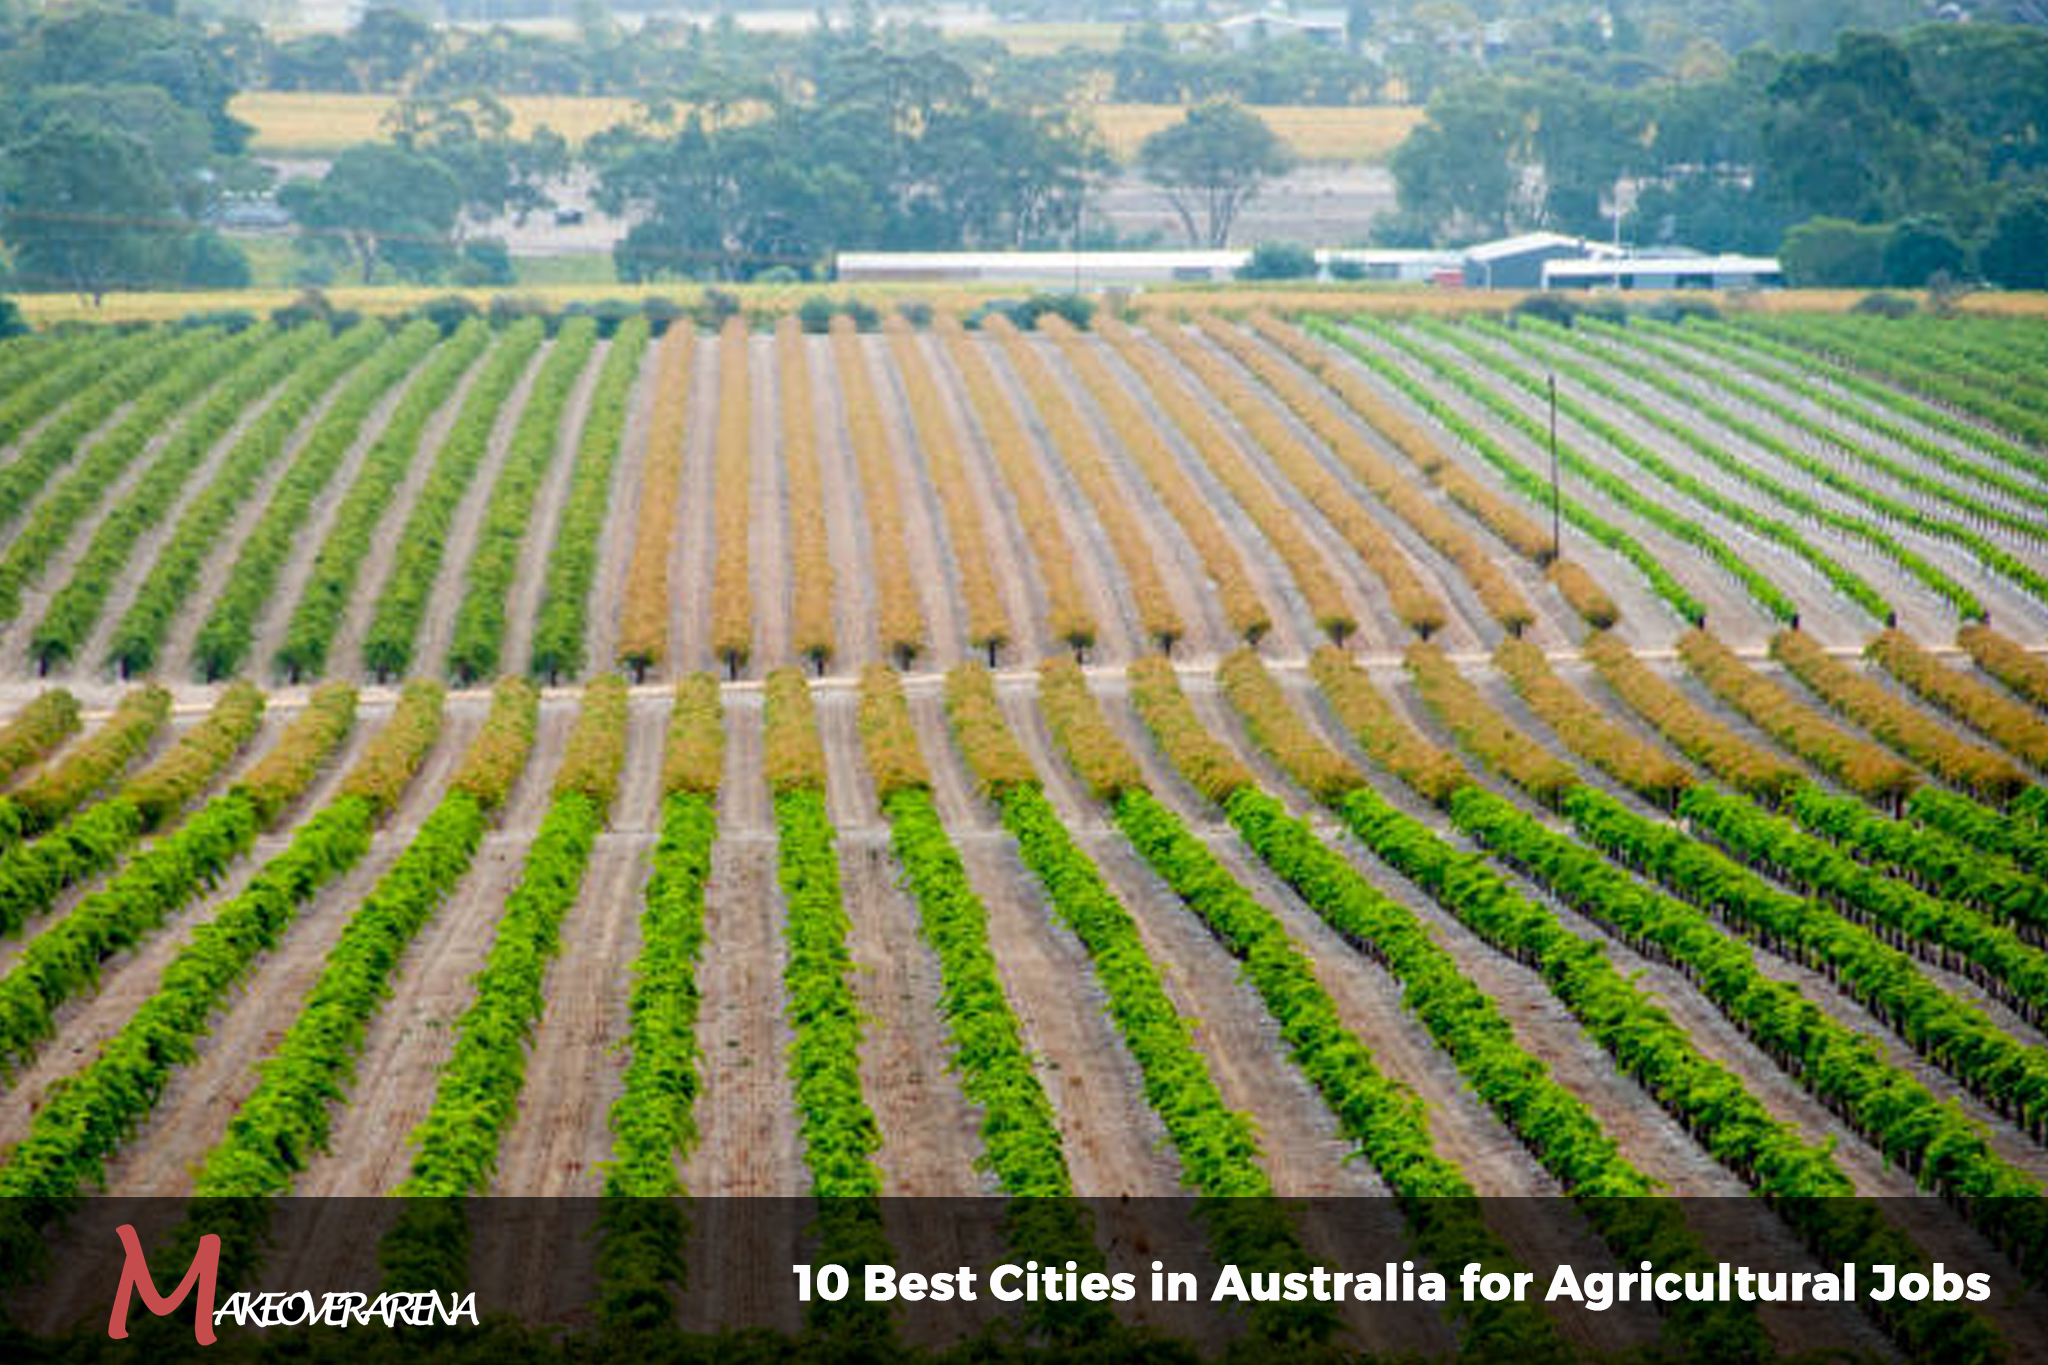 10 Best Cities in Australia for Agricultural Jobs